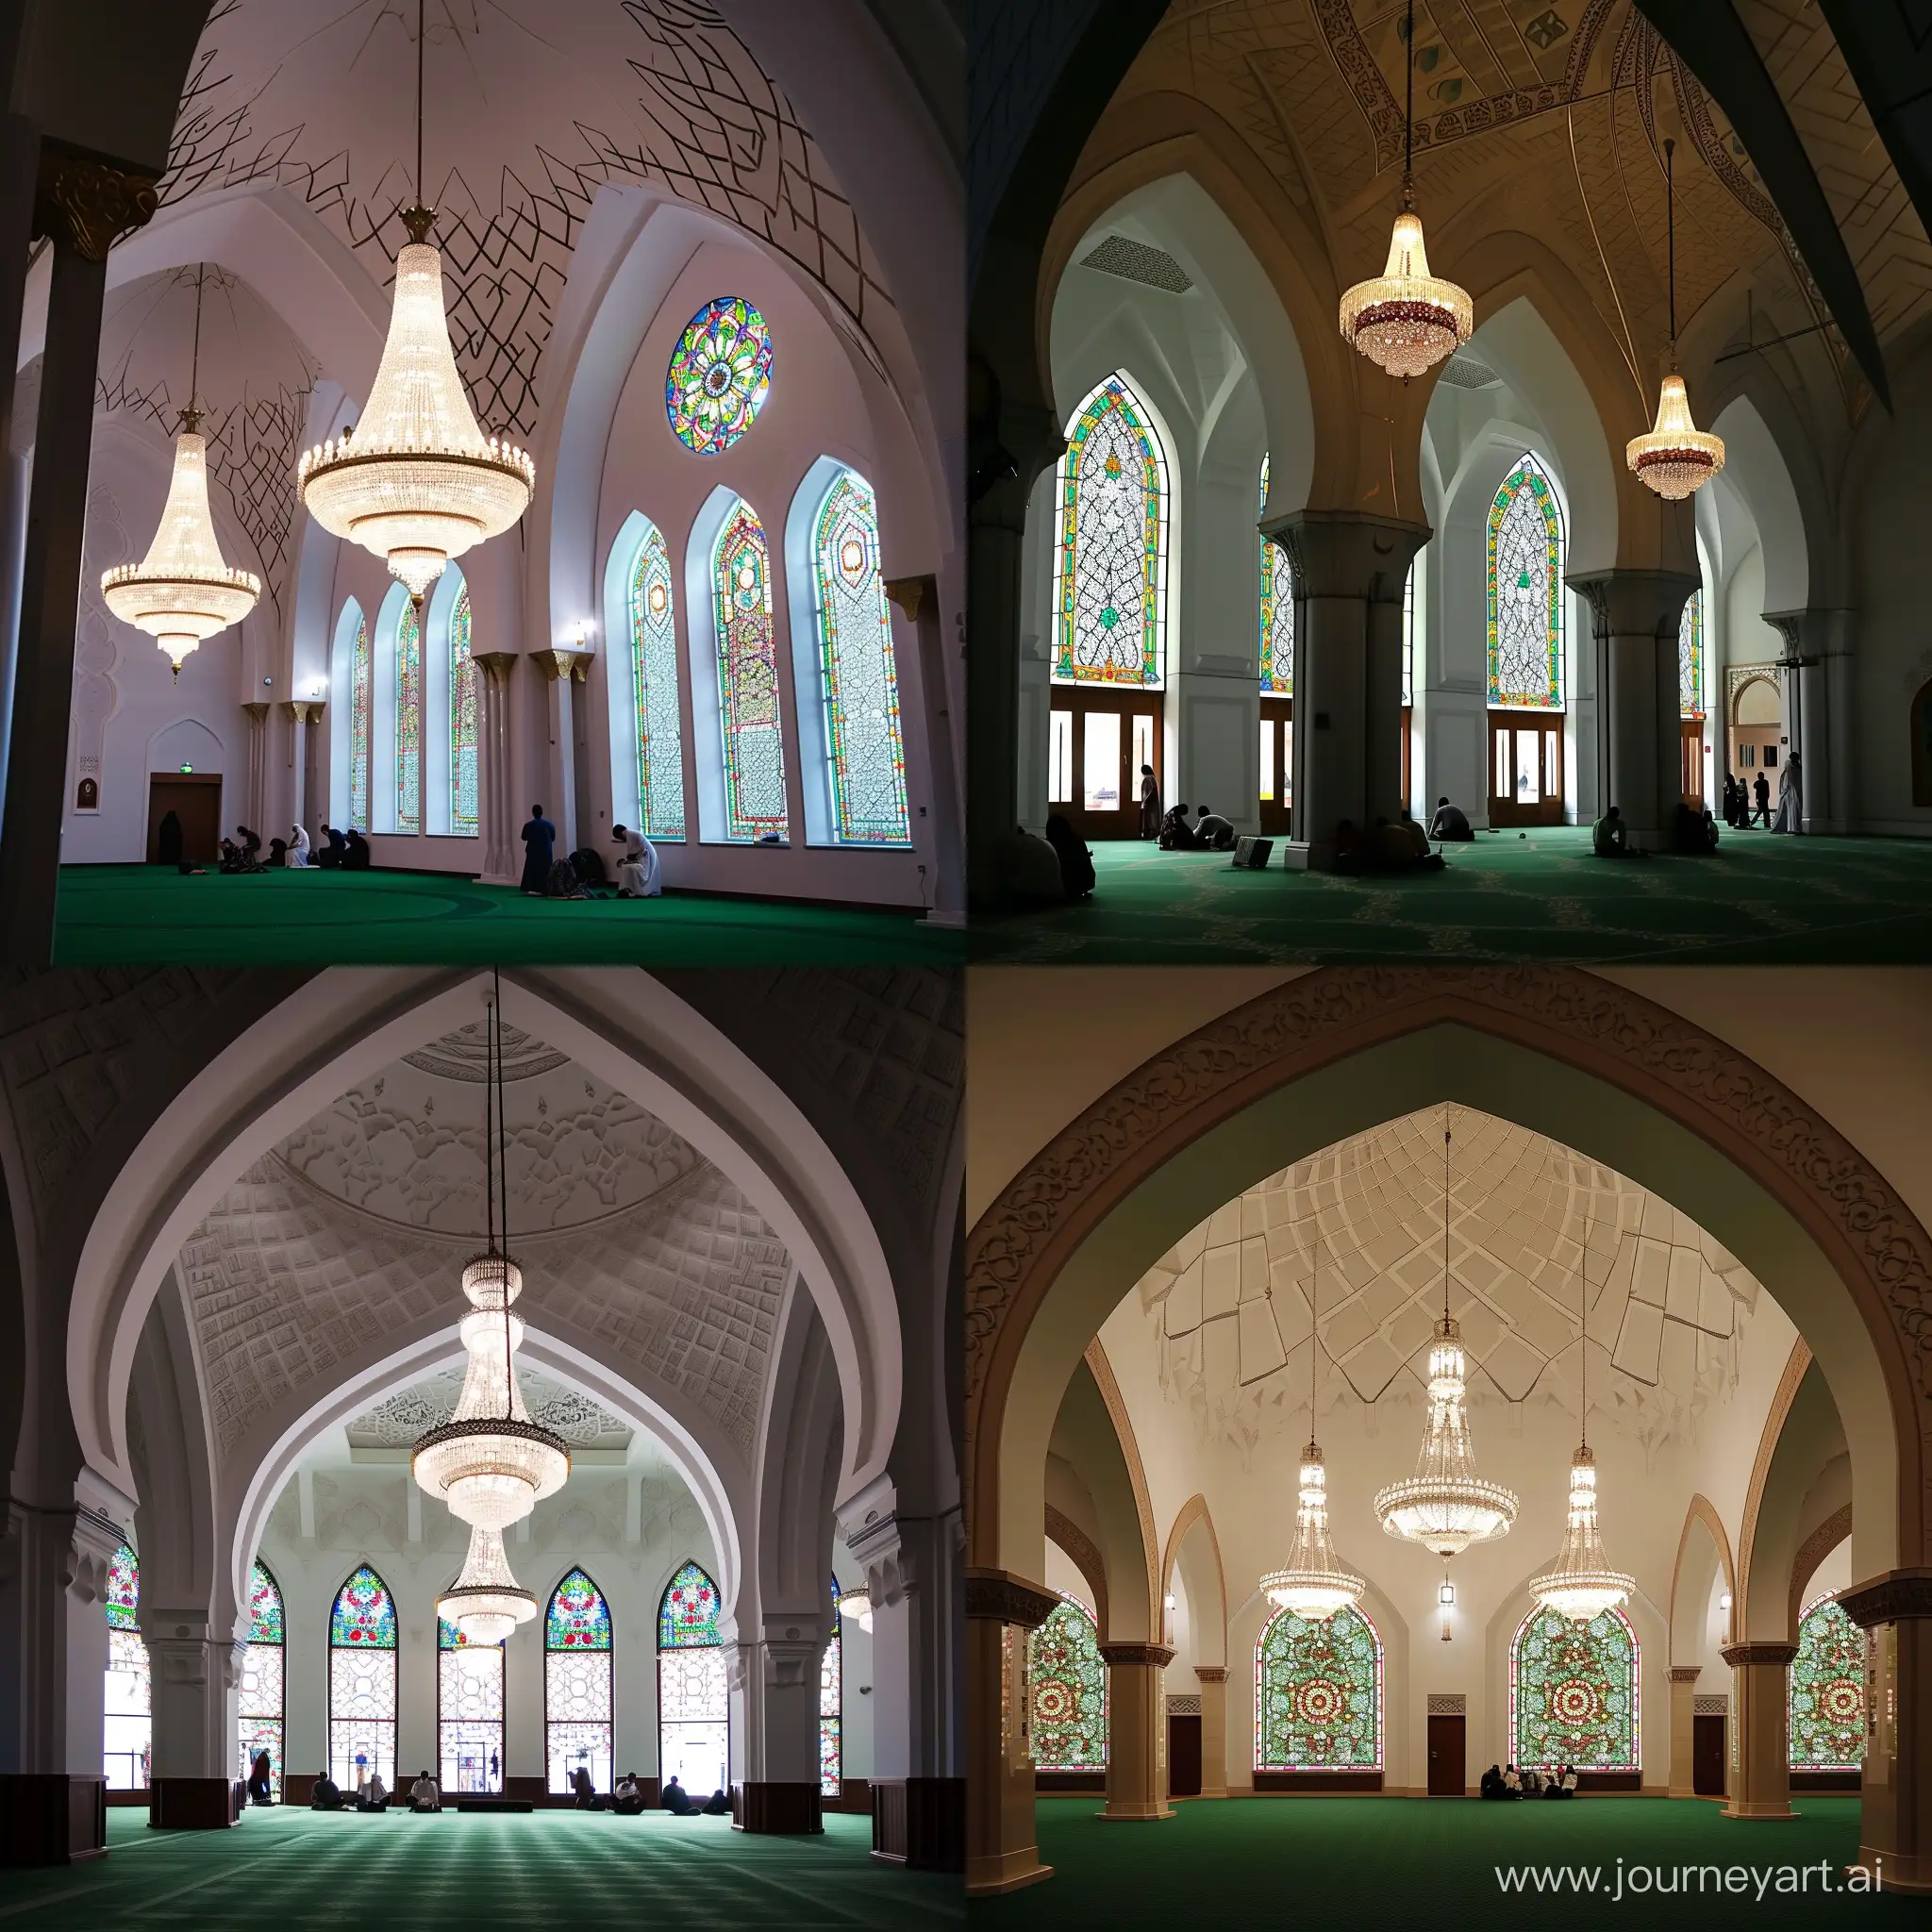 The picture shows the interior of the grand mosque with arches and stained glass windows. Two chandeliers hang from the ceiling, and there is a green carpet on the floor. The walls are white and decorated with geometric patterns. The room is dimly lit, and people can be seen praying.